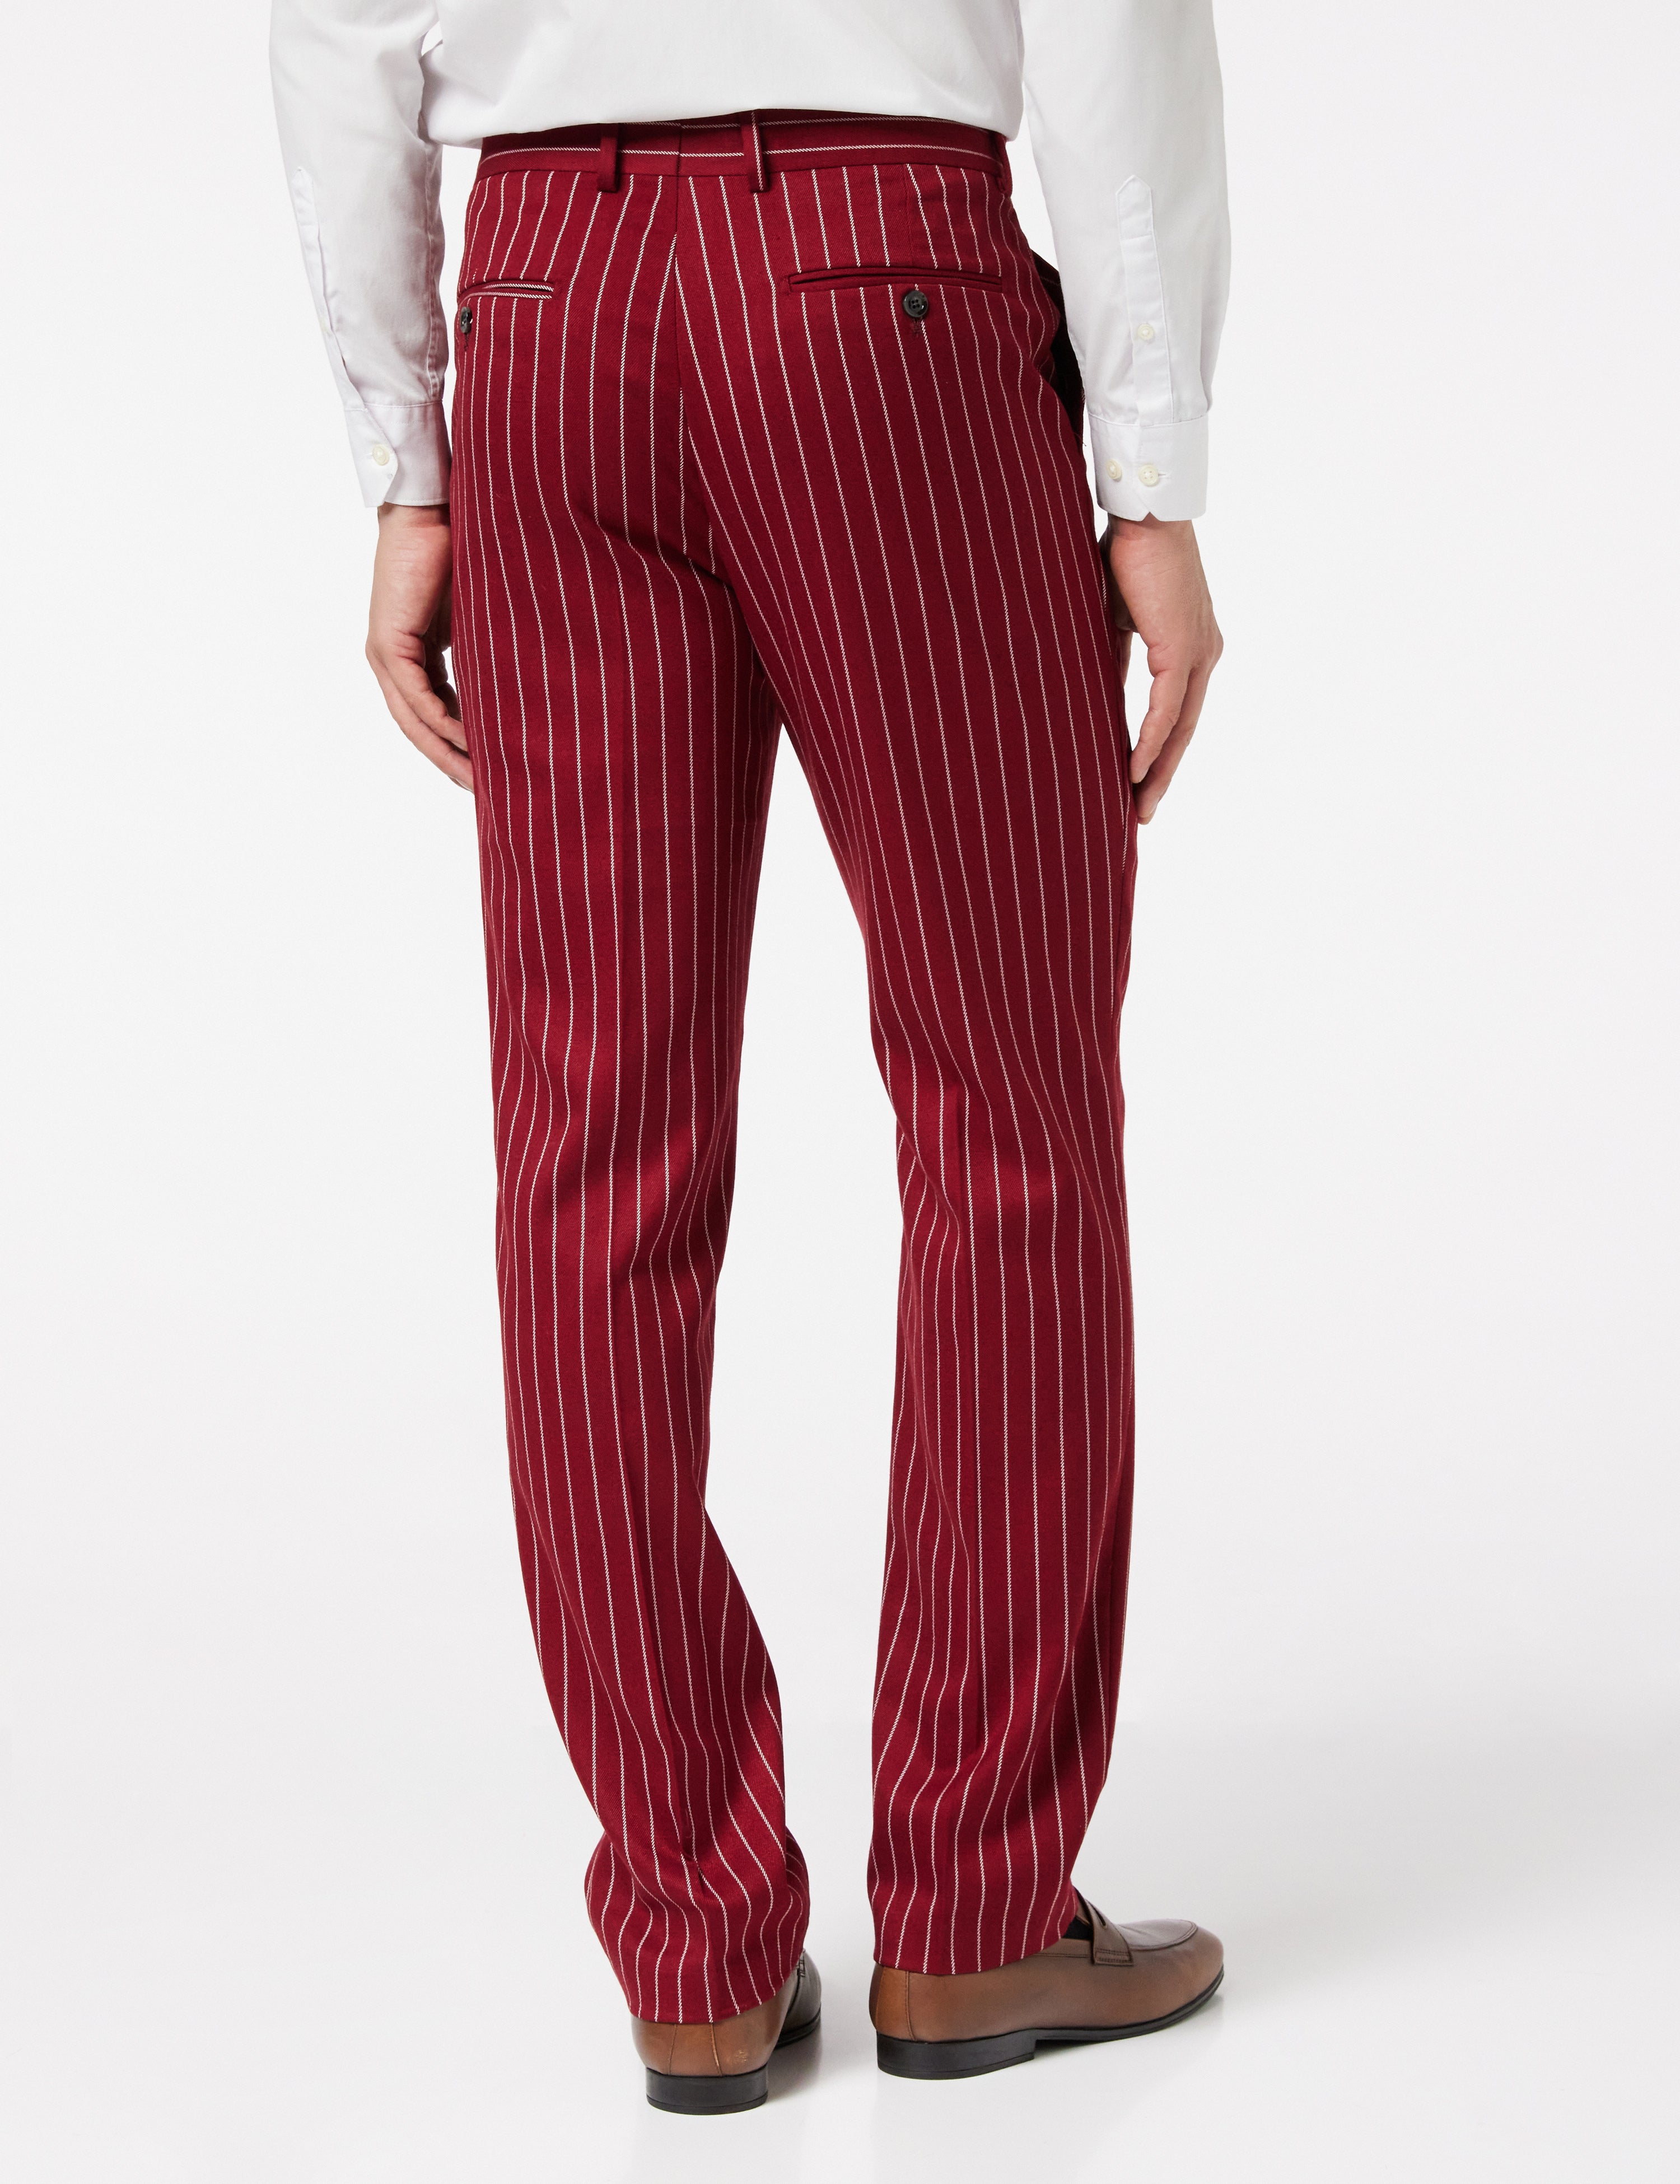 TERRY - Double Breasted Pinstripe Maroon Suit